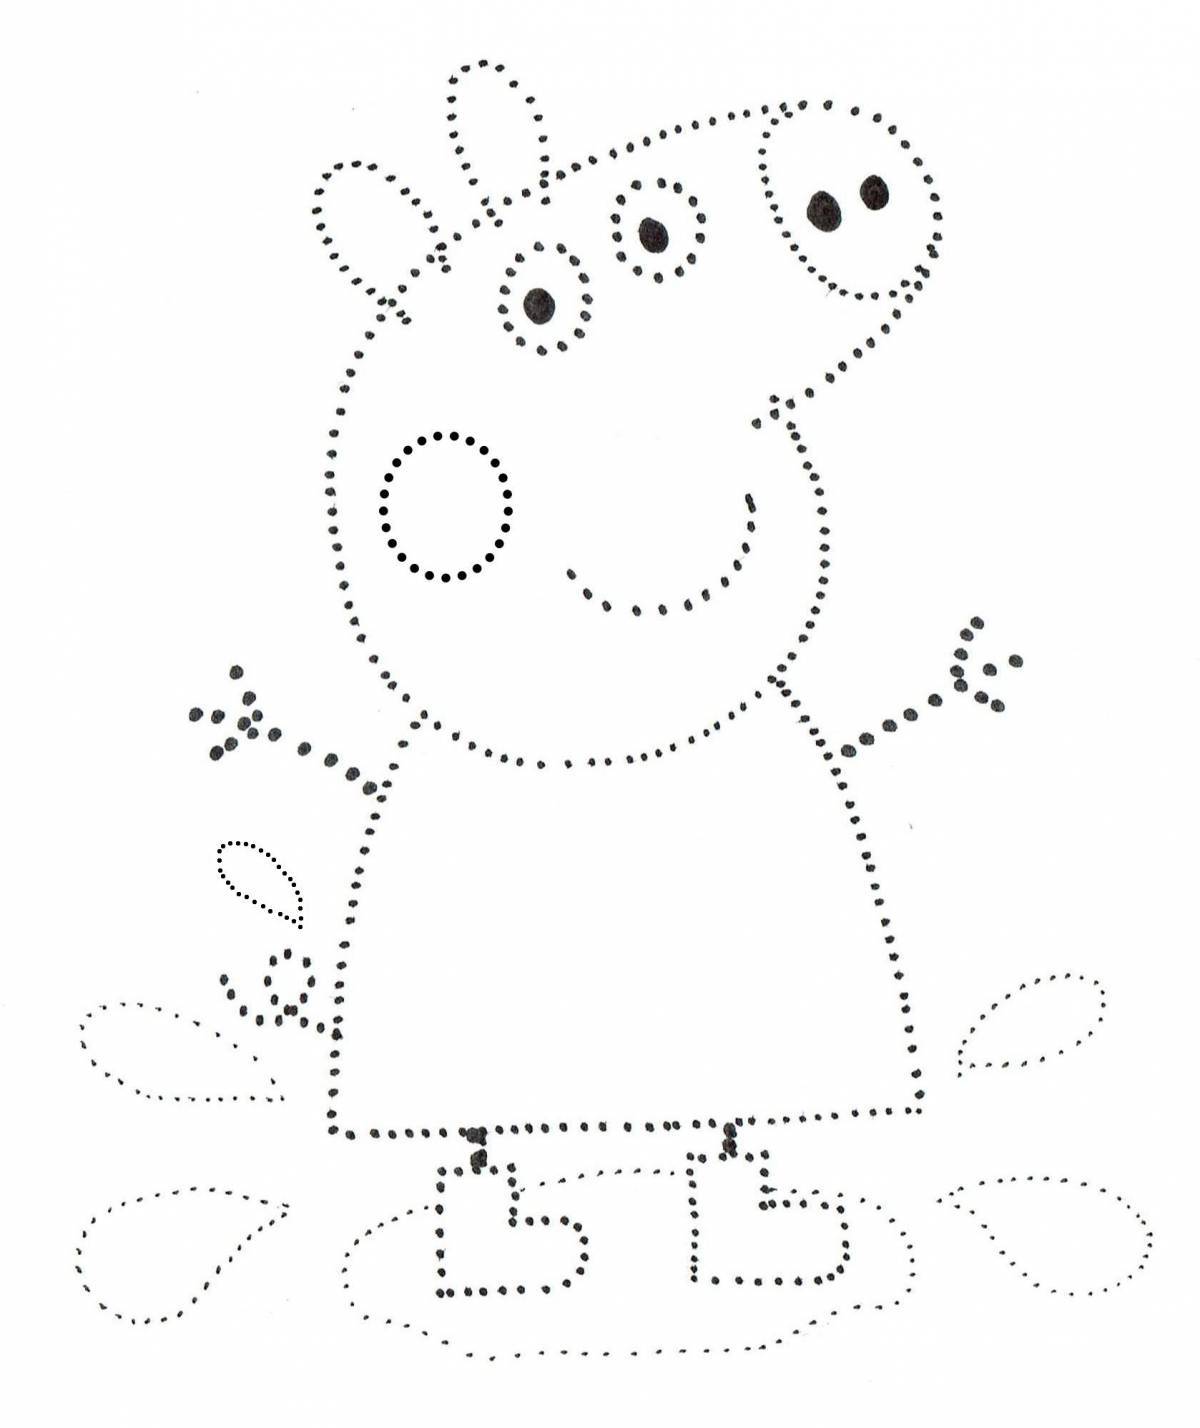 By dots for children 5 6 years old #10